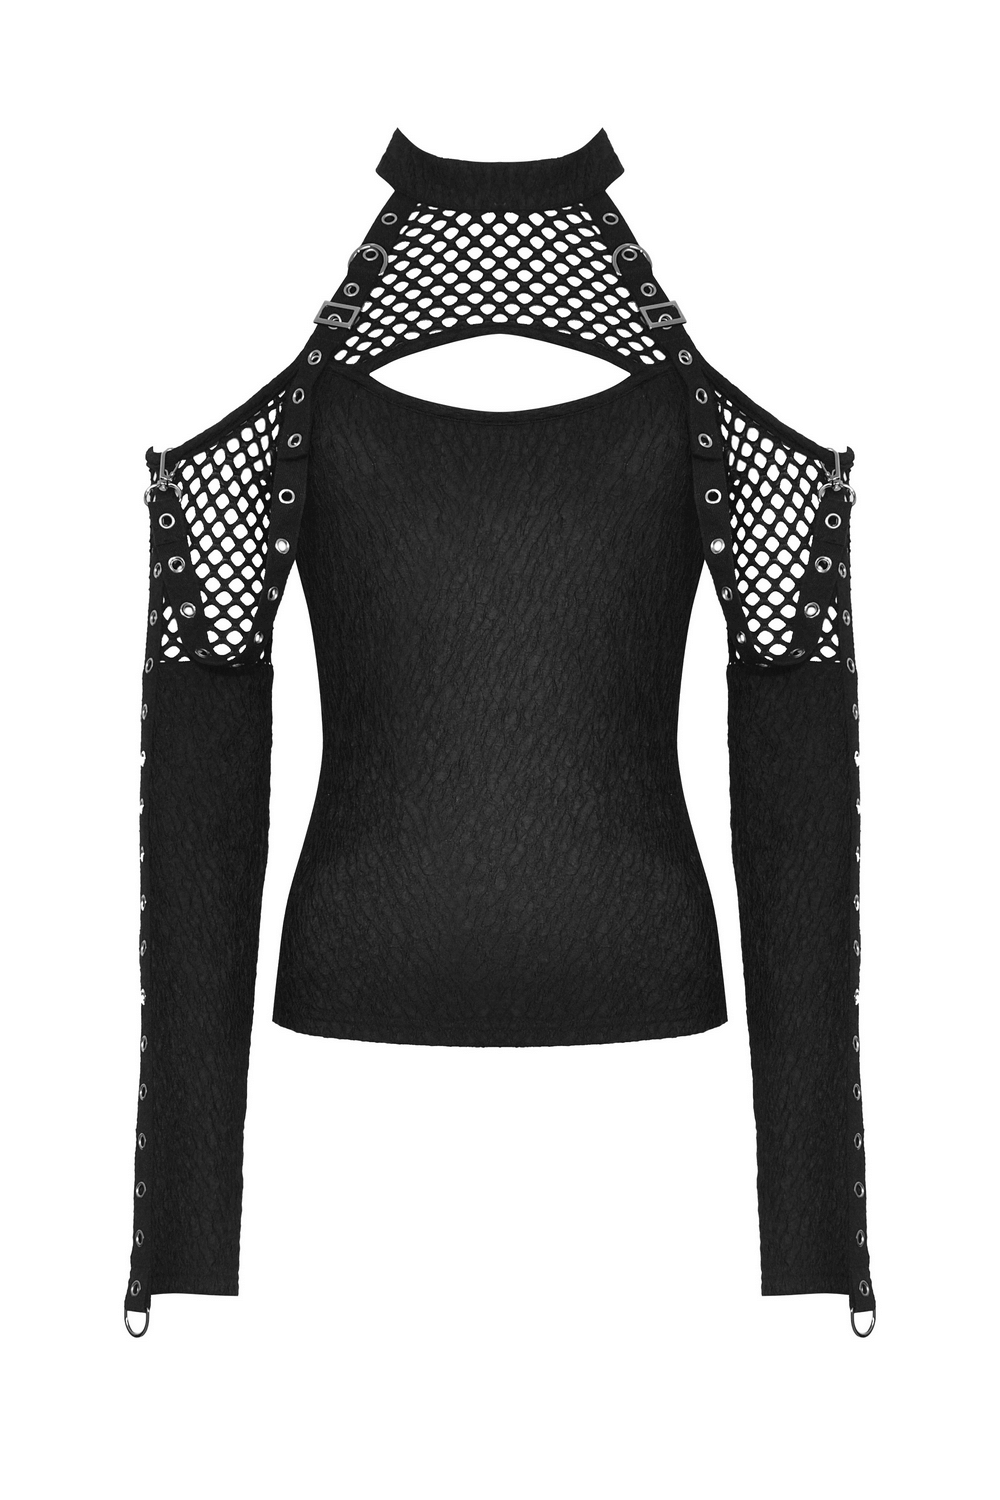 Stylish Lace Top with Cutouts and Lace-Up Sleeves